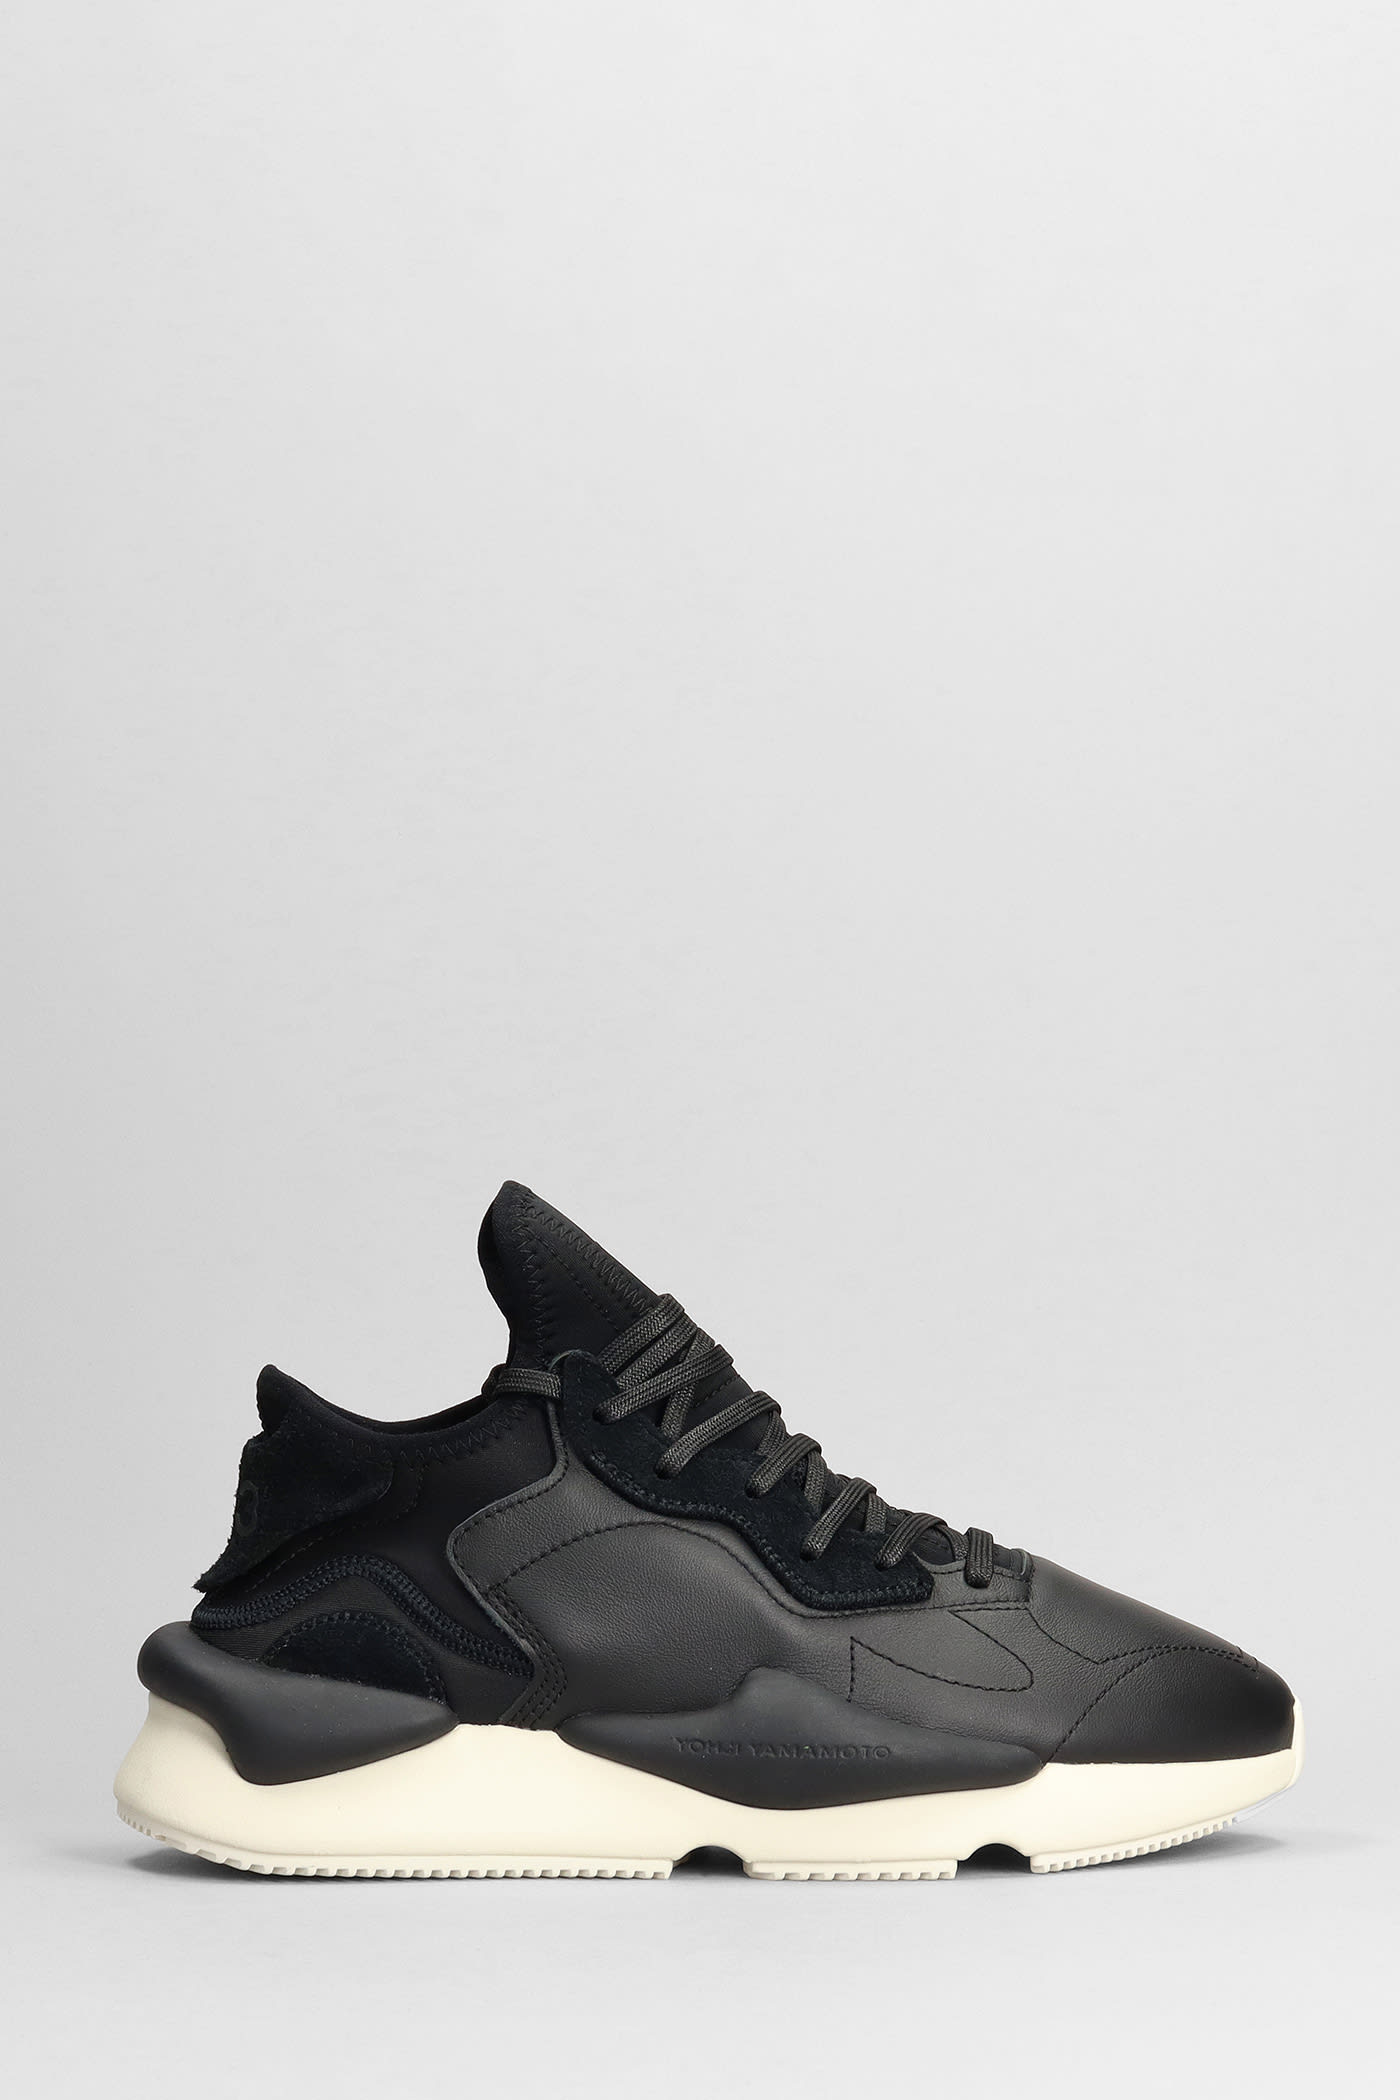 Y-3 KAIWA SNEAKERS IN BLACK LEATHER AND FABRIC